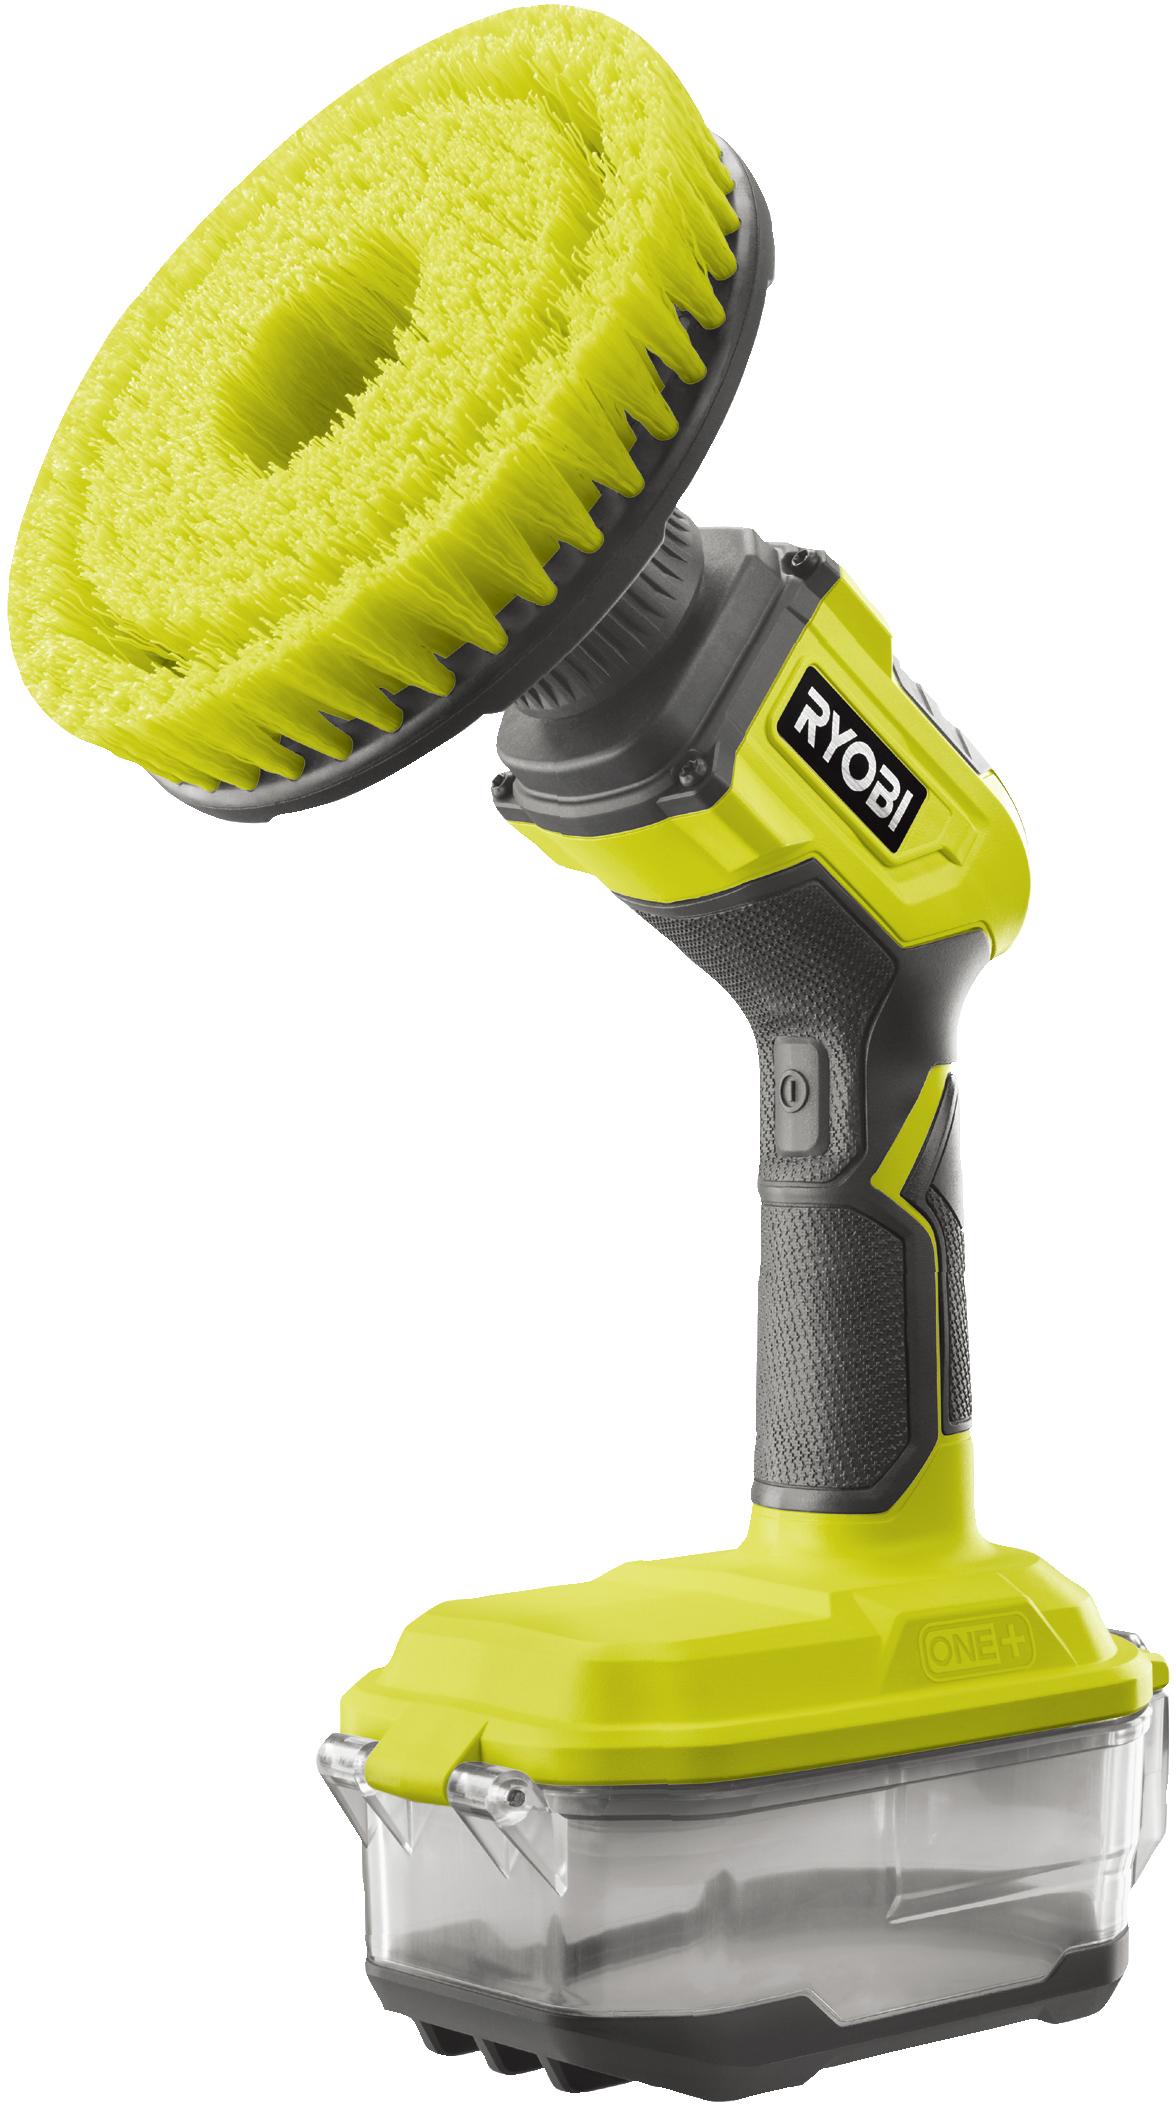 R18Cps-0 One+ Compact Power Scrubber